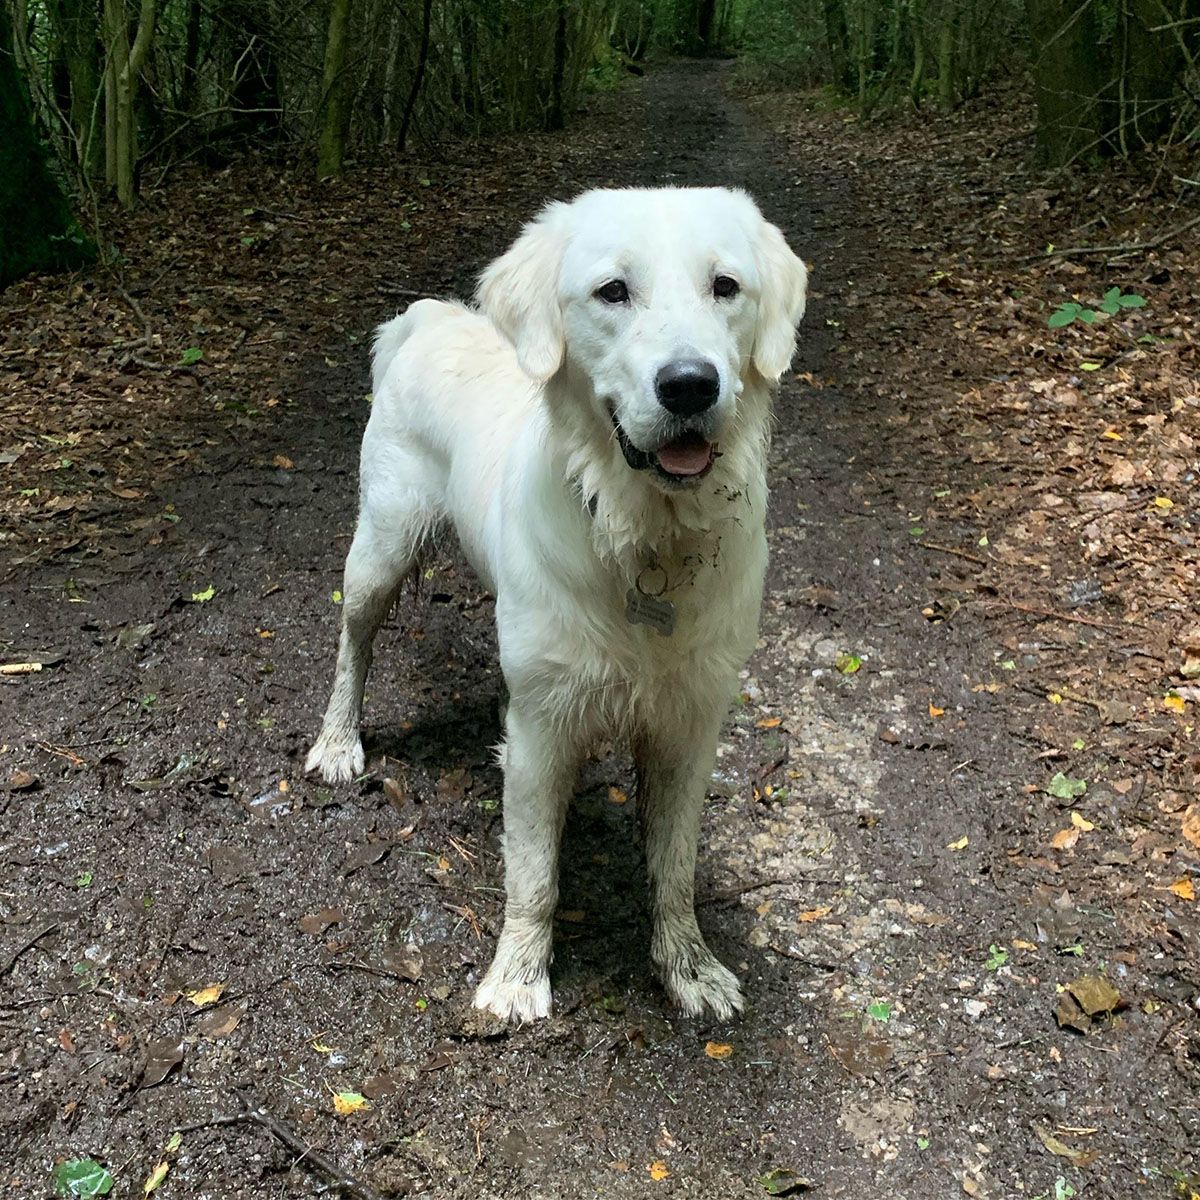 Golden Retriever out on a winter walk with muddy legs and body